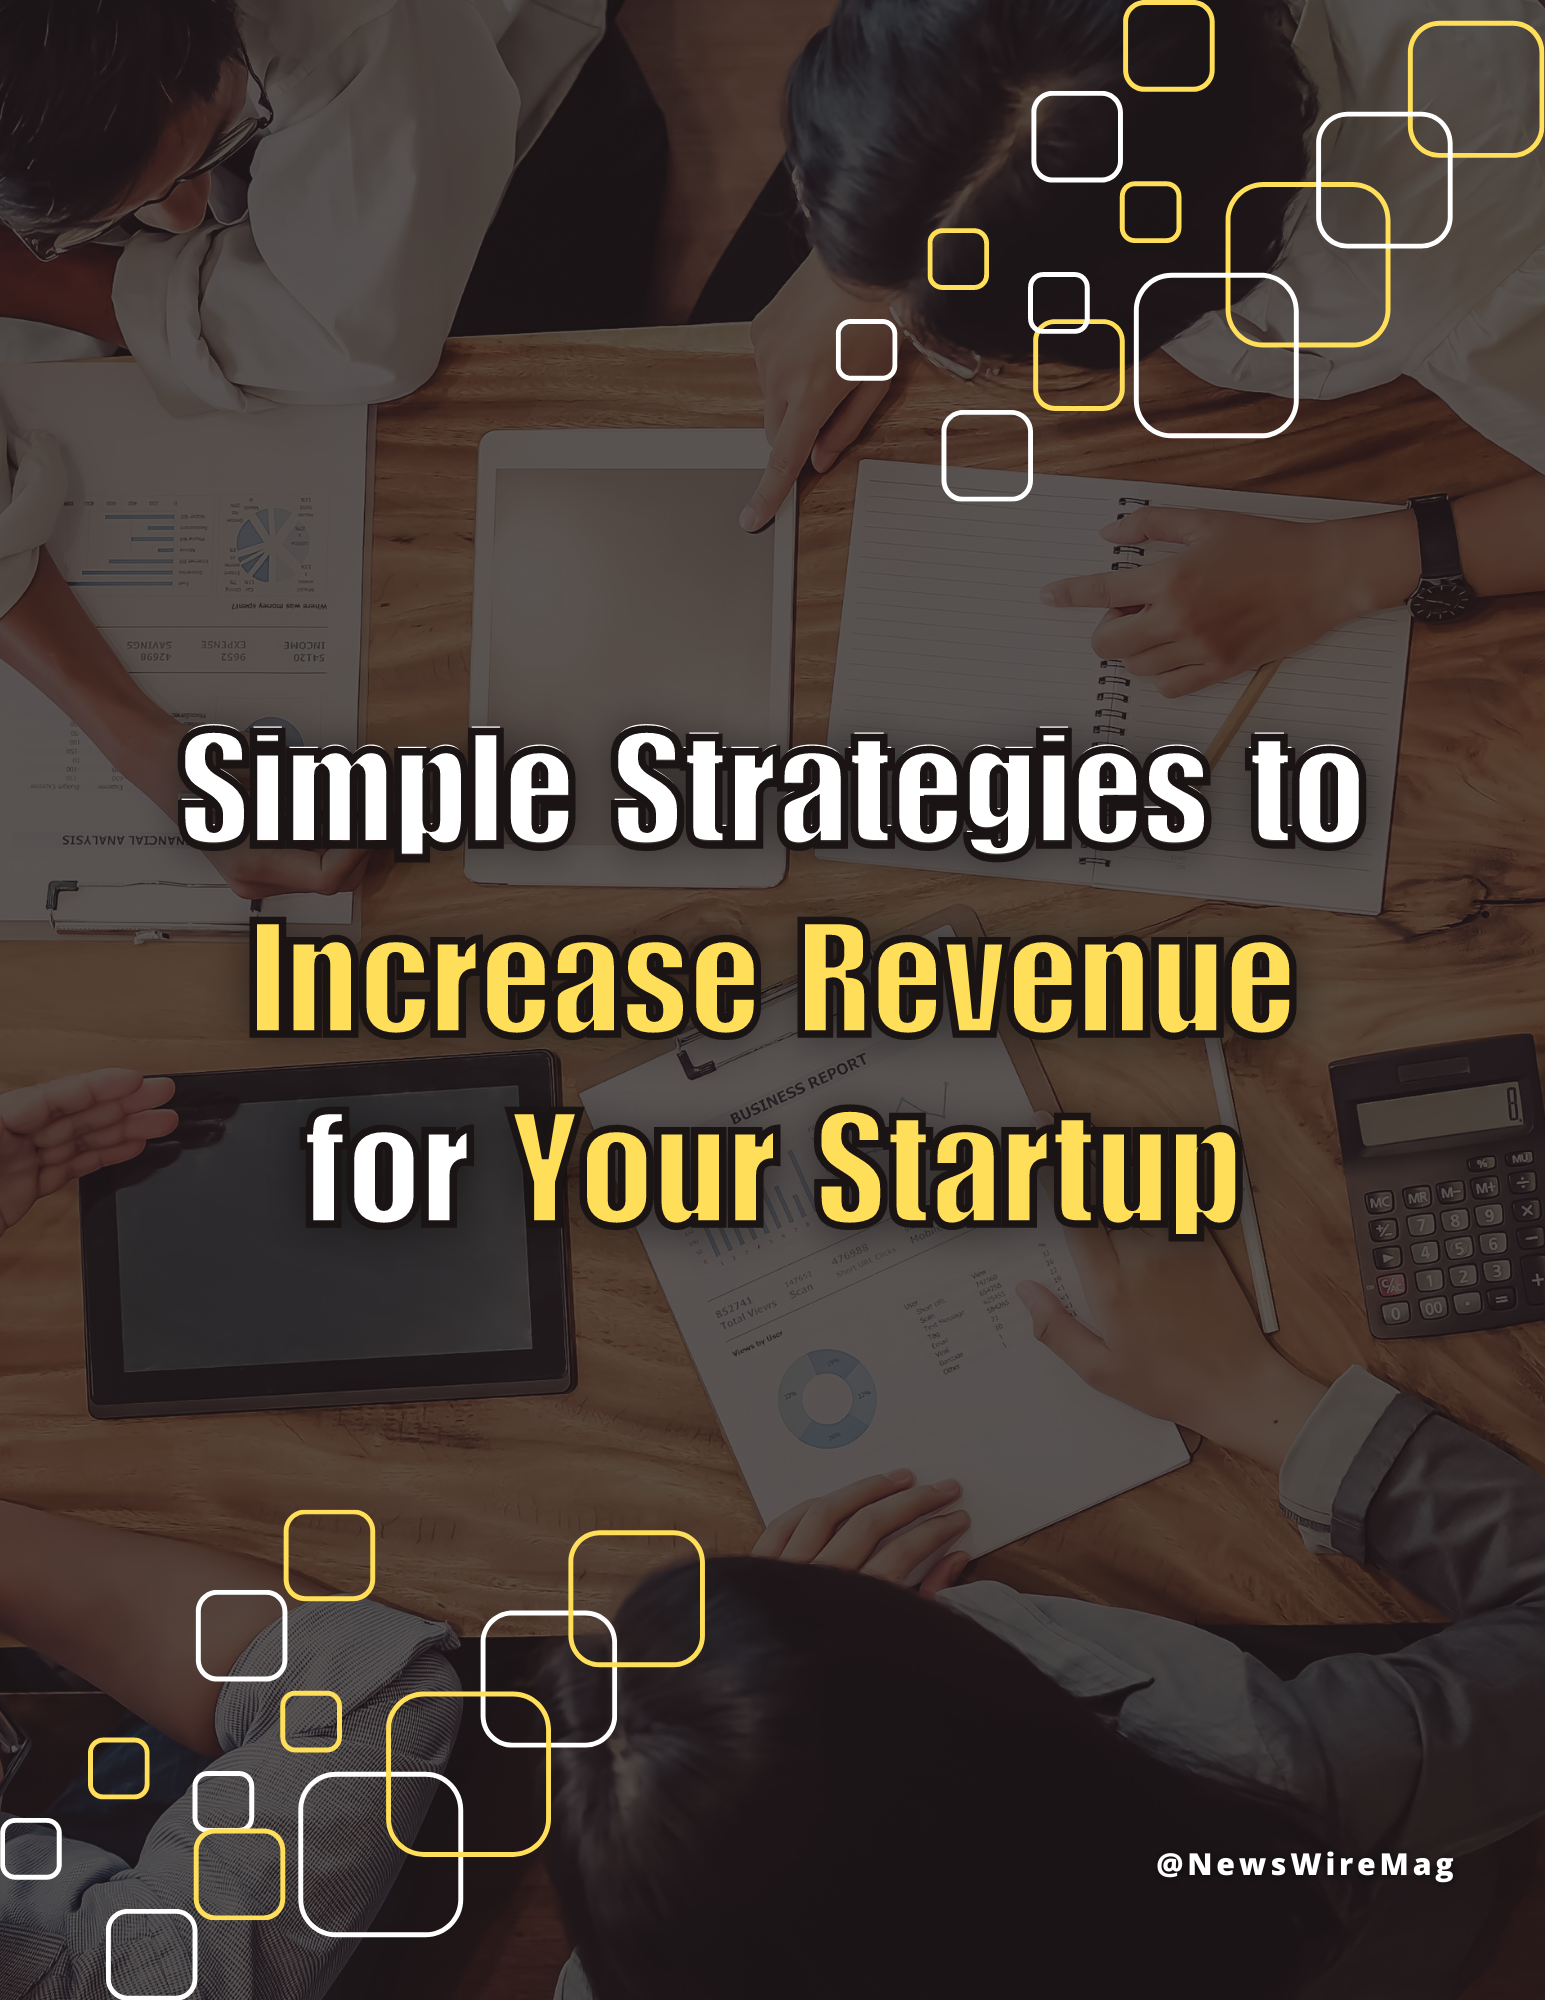 Simple Strategies to Increase Revenue for Your Startup